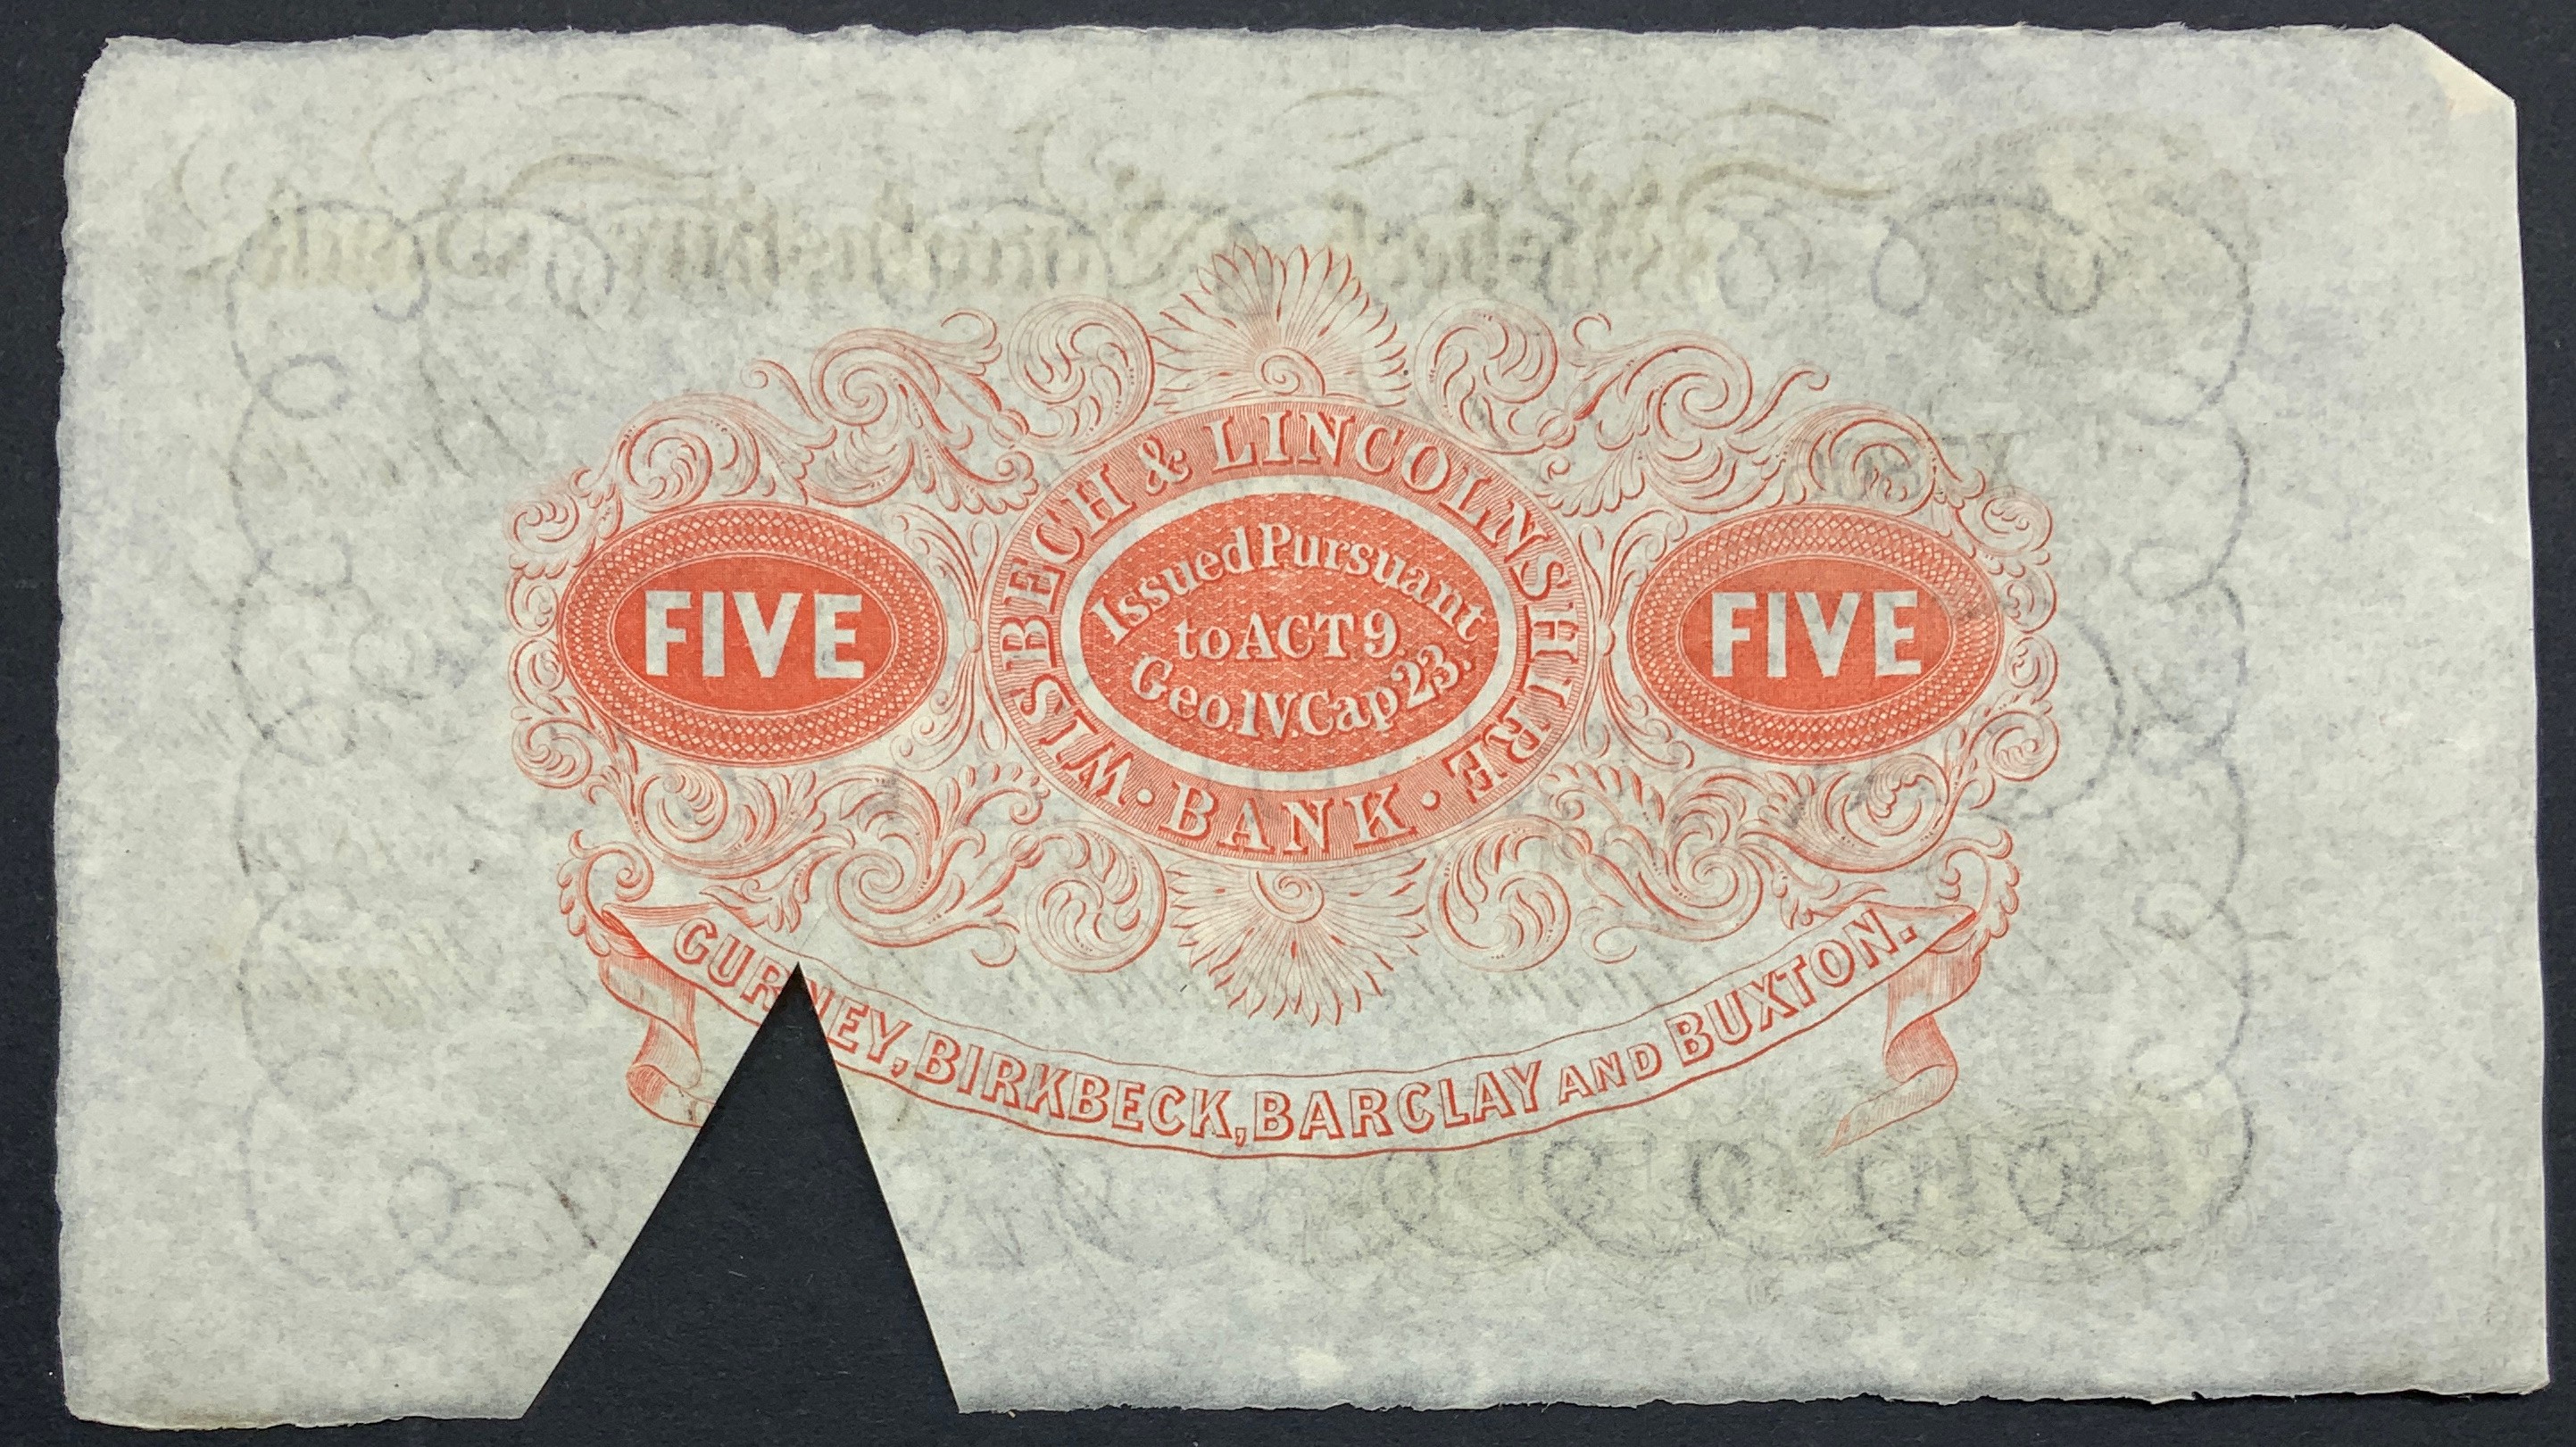 £5 1952 BANK NOTE & £5 FOR WISBECH & LINCOLNSHIRE 1894 - Image 3 of 3